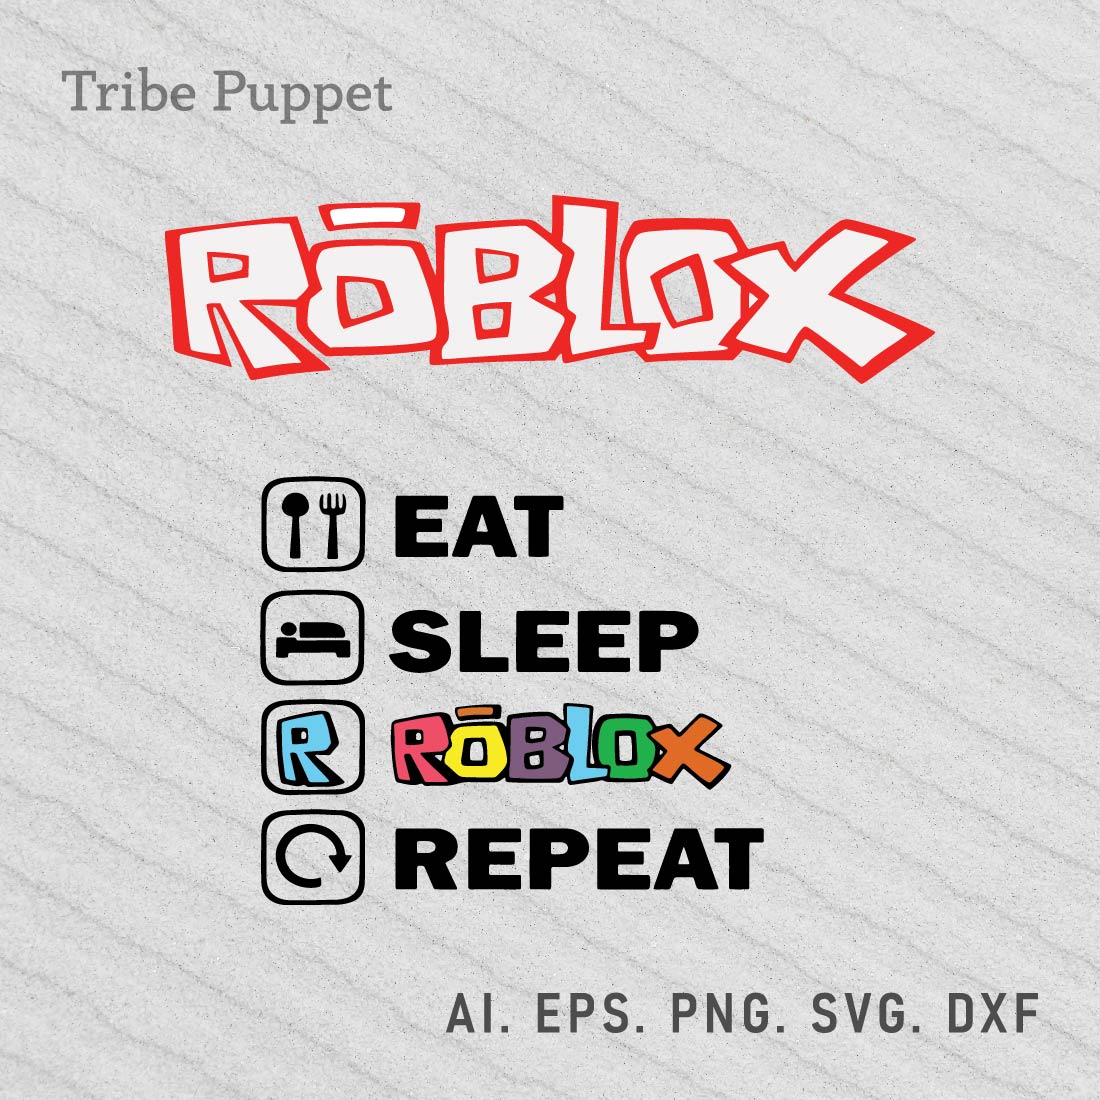 Roblox Characters preview image.